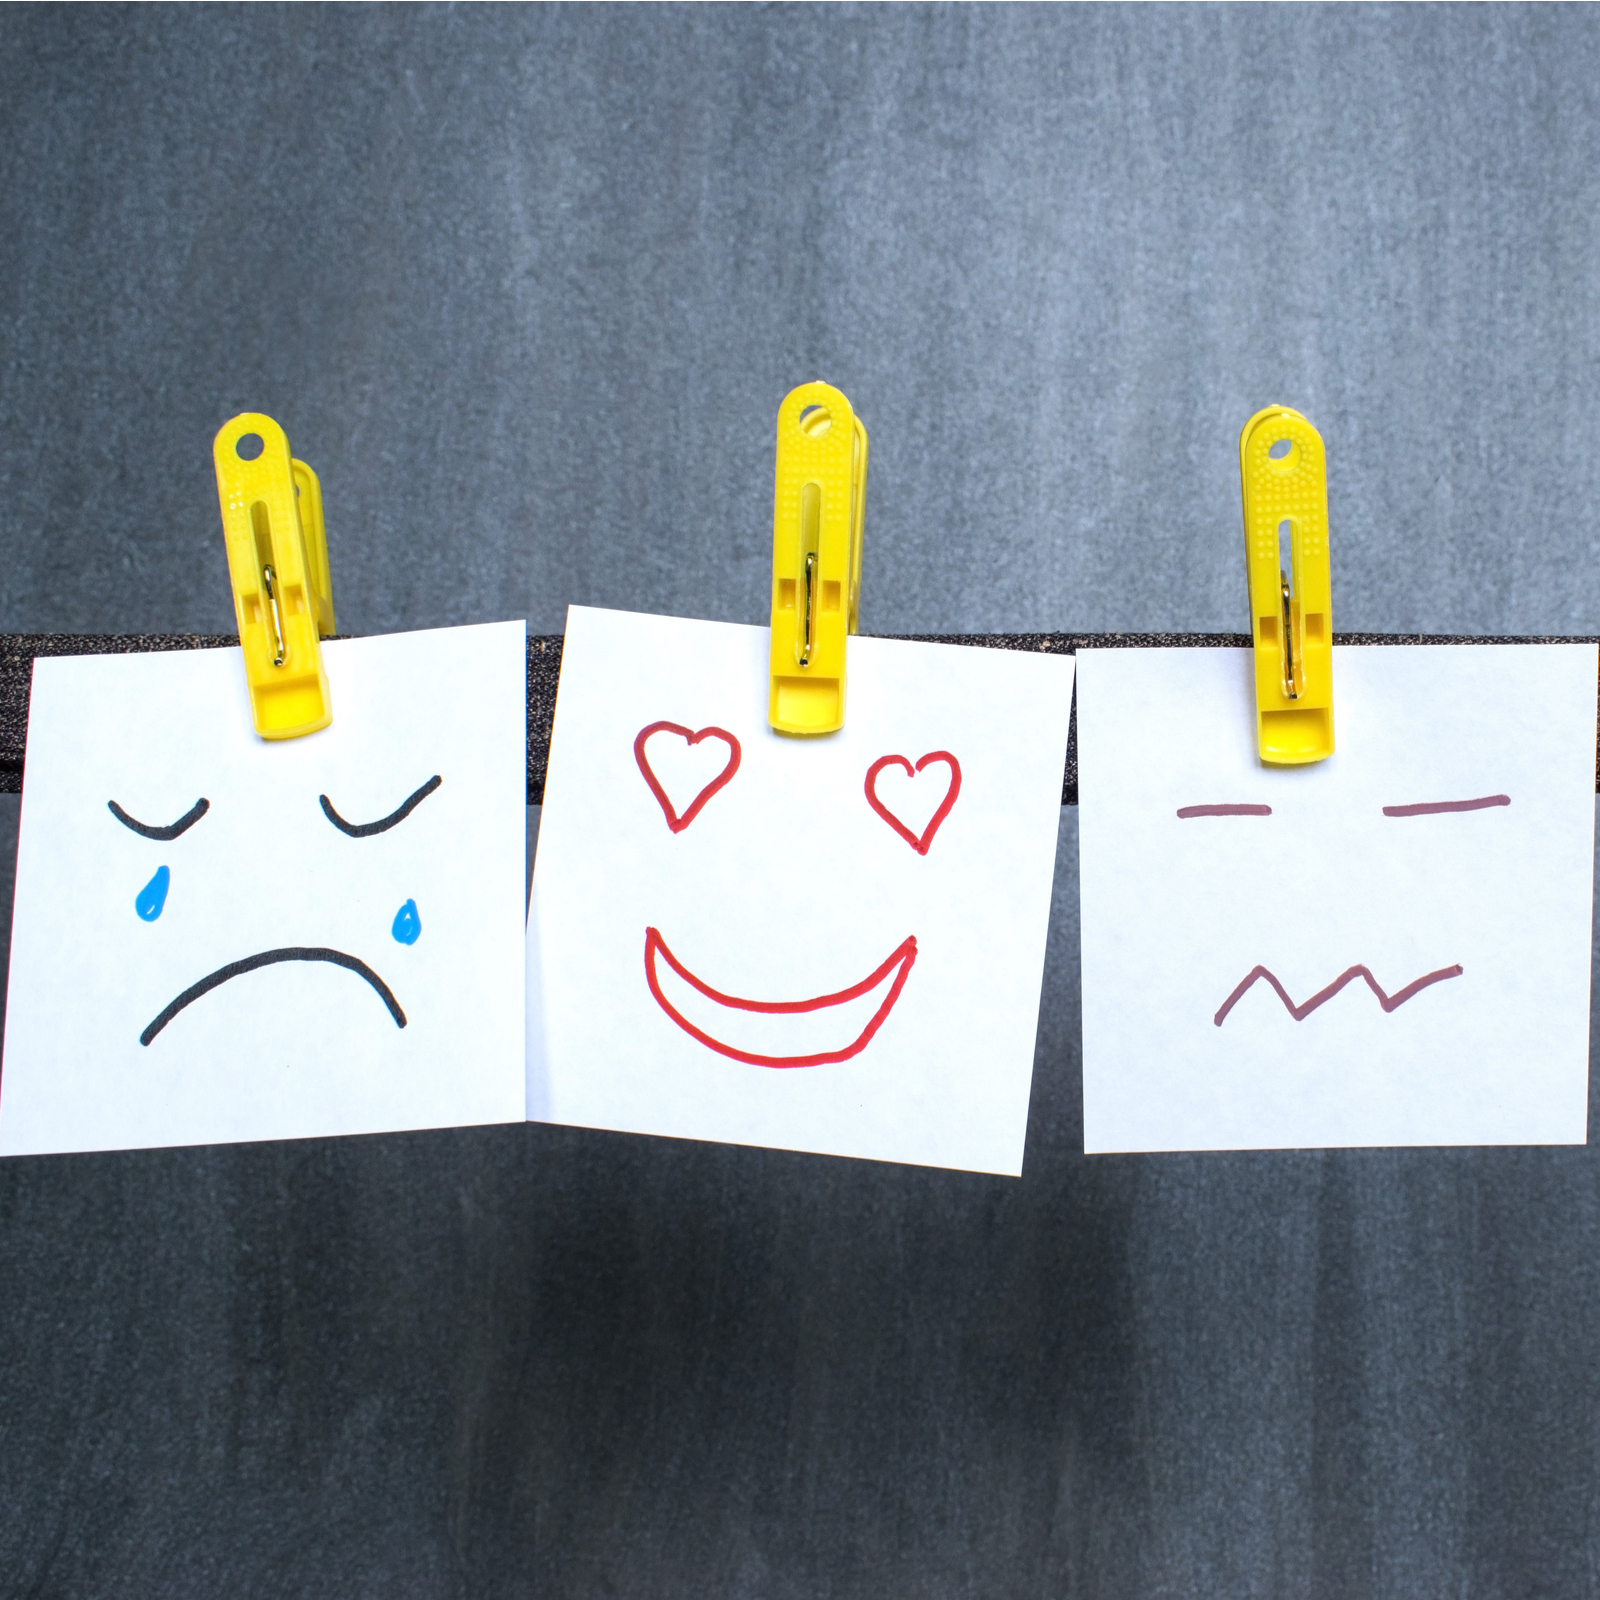 Sentiment Analysis Is the Best Trading Tool You’re Not Using